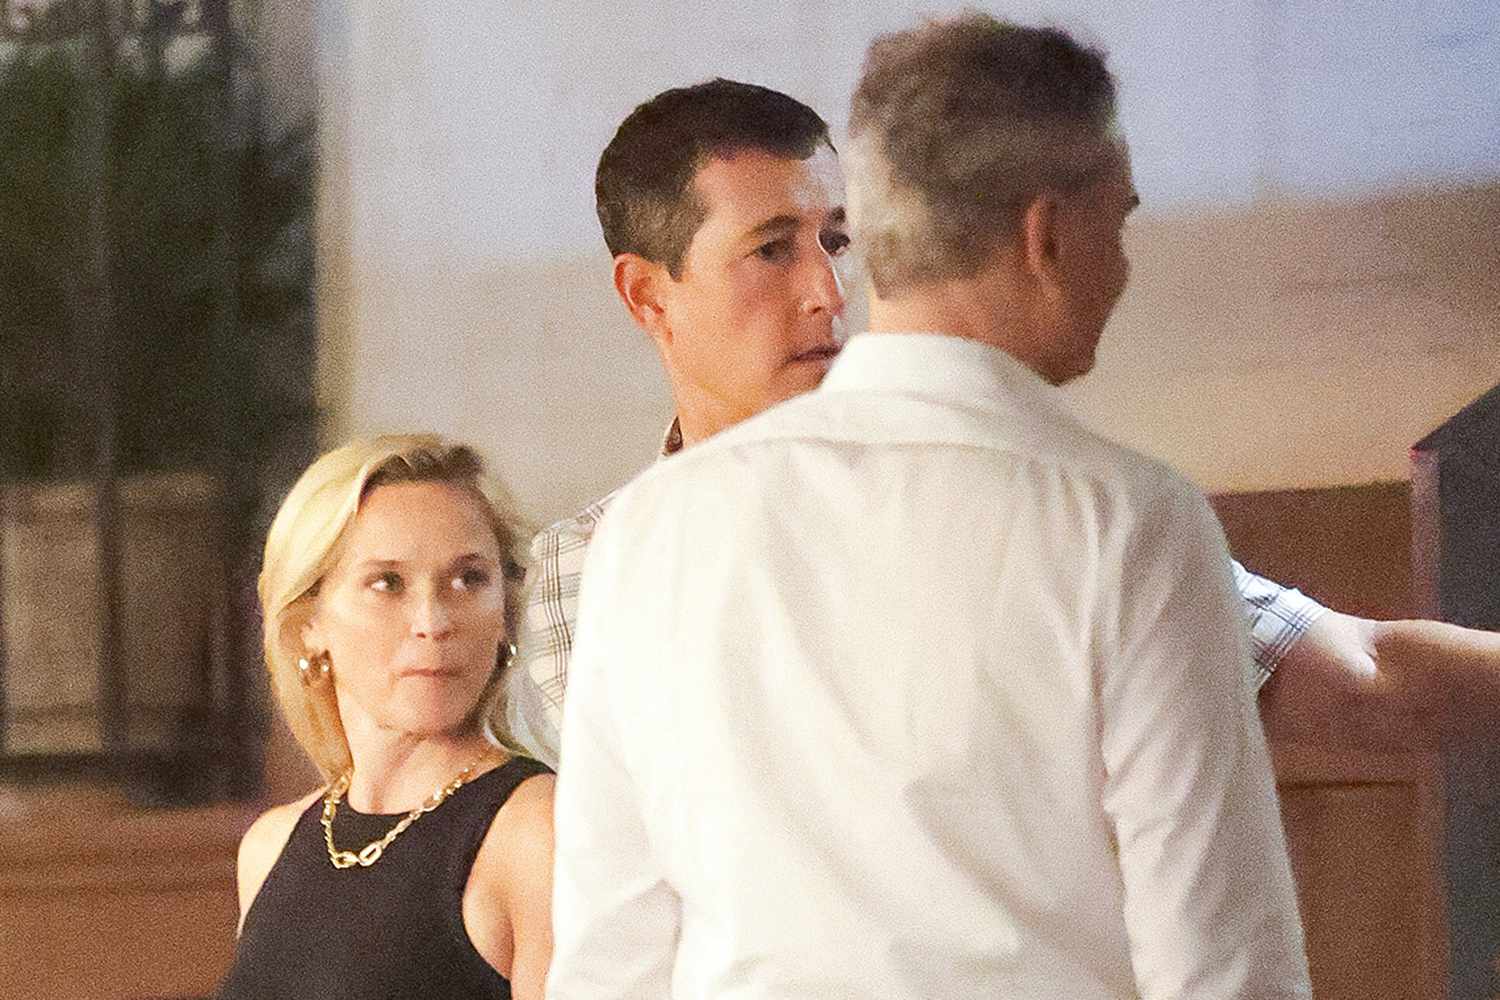 Reese Witherspoon Spotted Out to Dinner with Financier Oliver Haarmann, Source Says They're 'Friends'